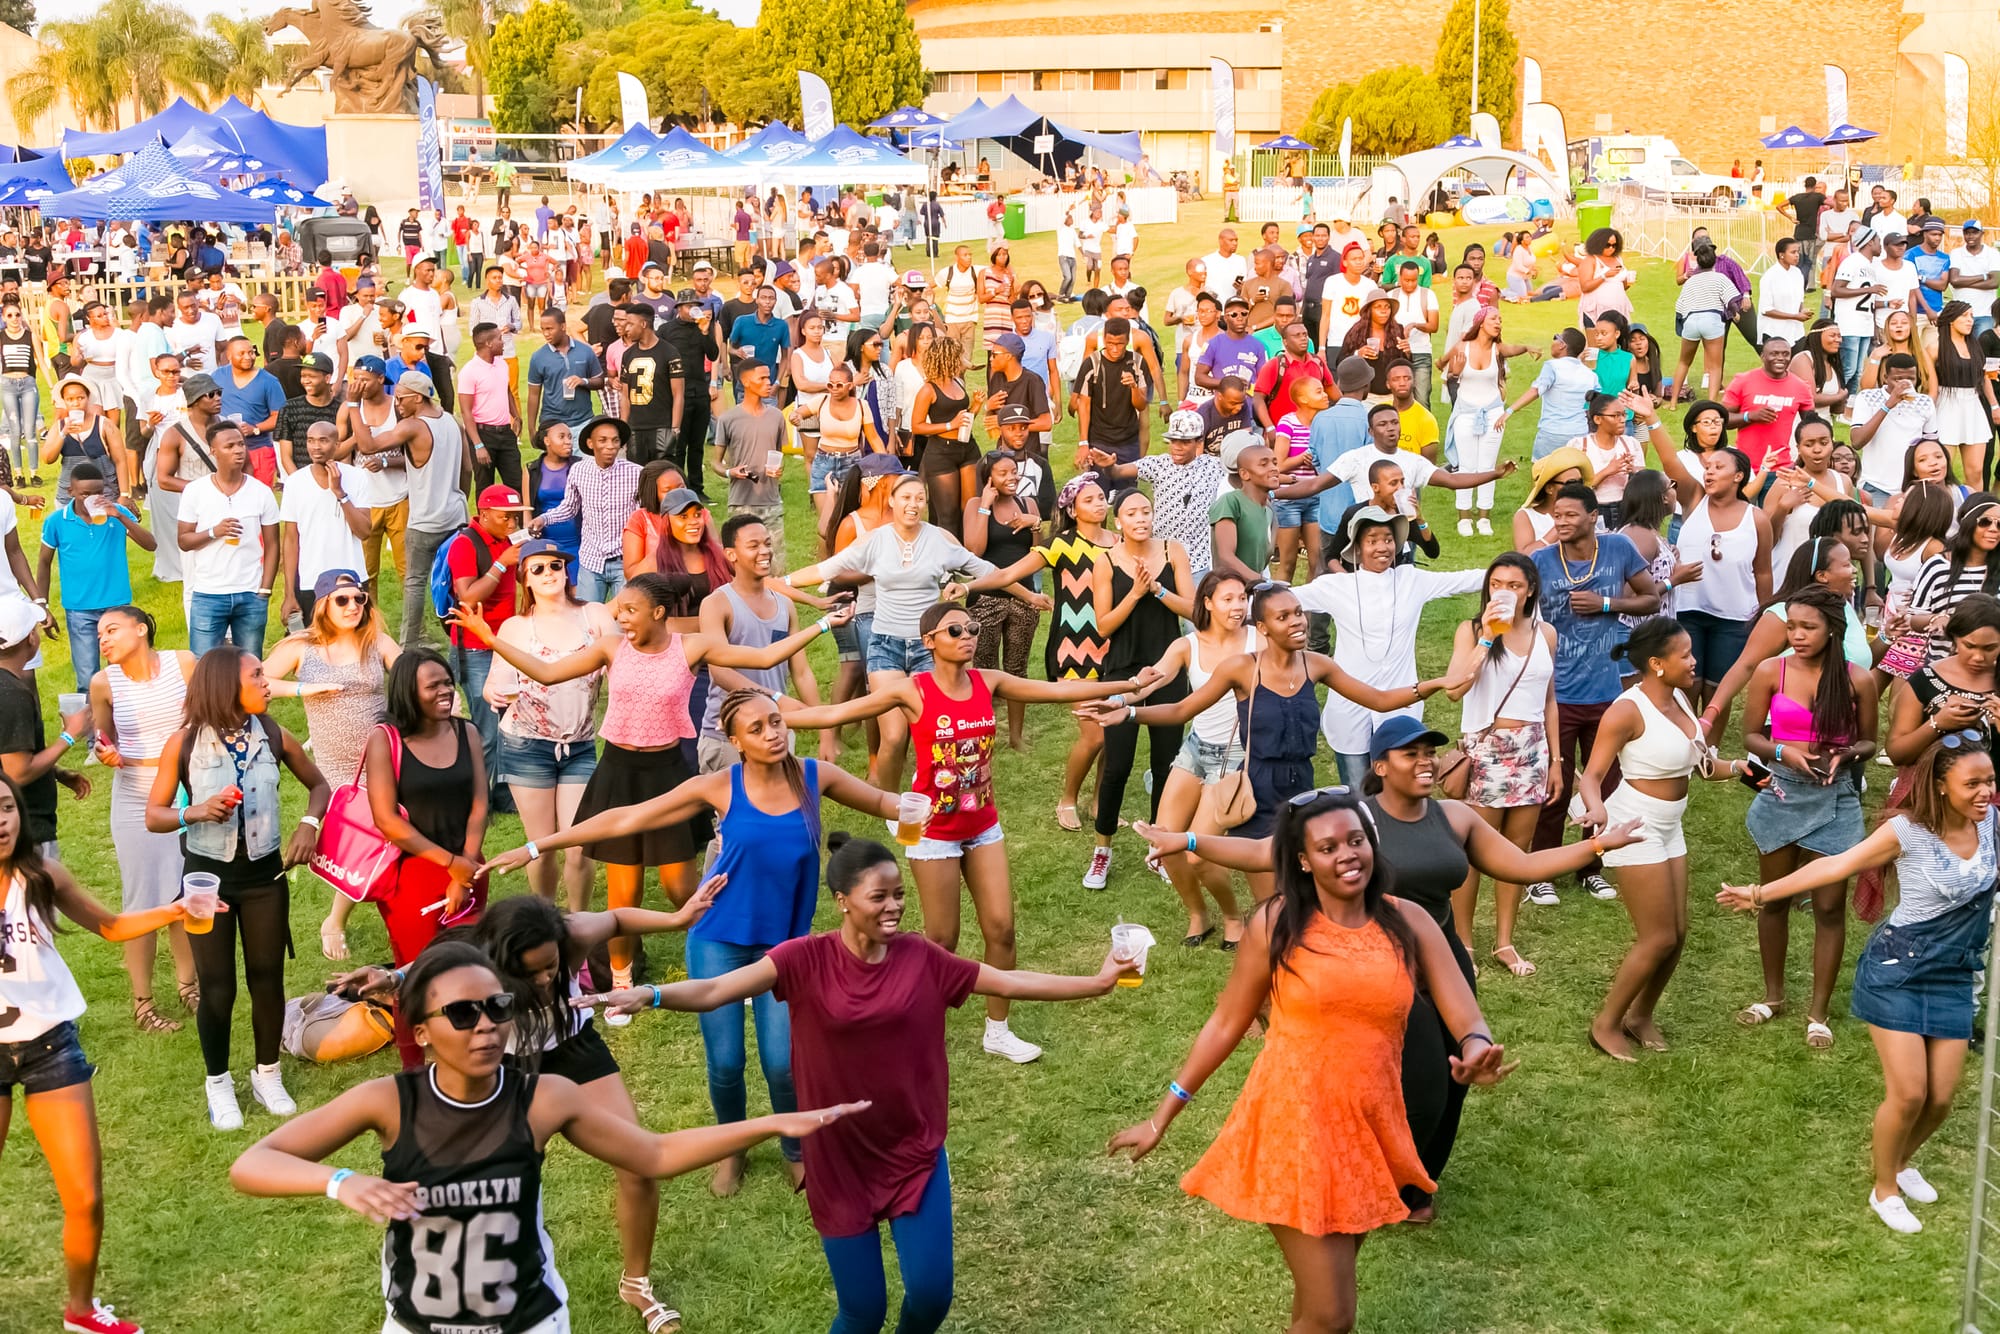 Group of diverse people dancing and having fun at an outdoor concert in Johannesburg, South Africa